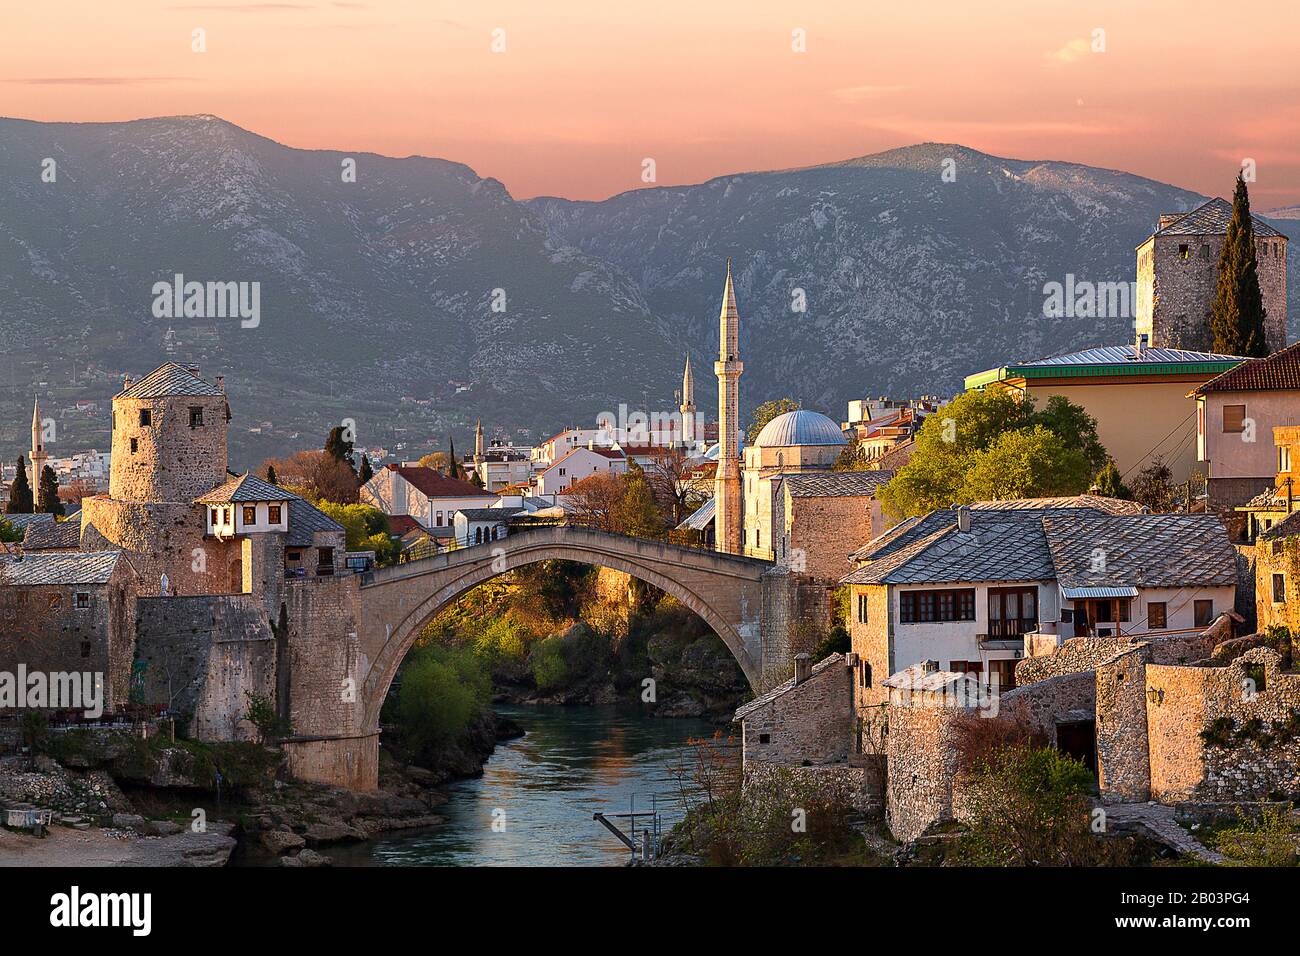 Historical Mostar Bridge in the town of Mostar in Bosnia and Herzegovina Stock Photo